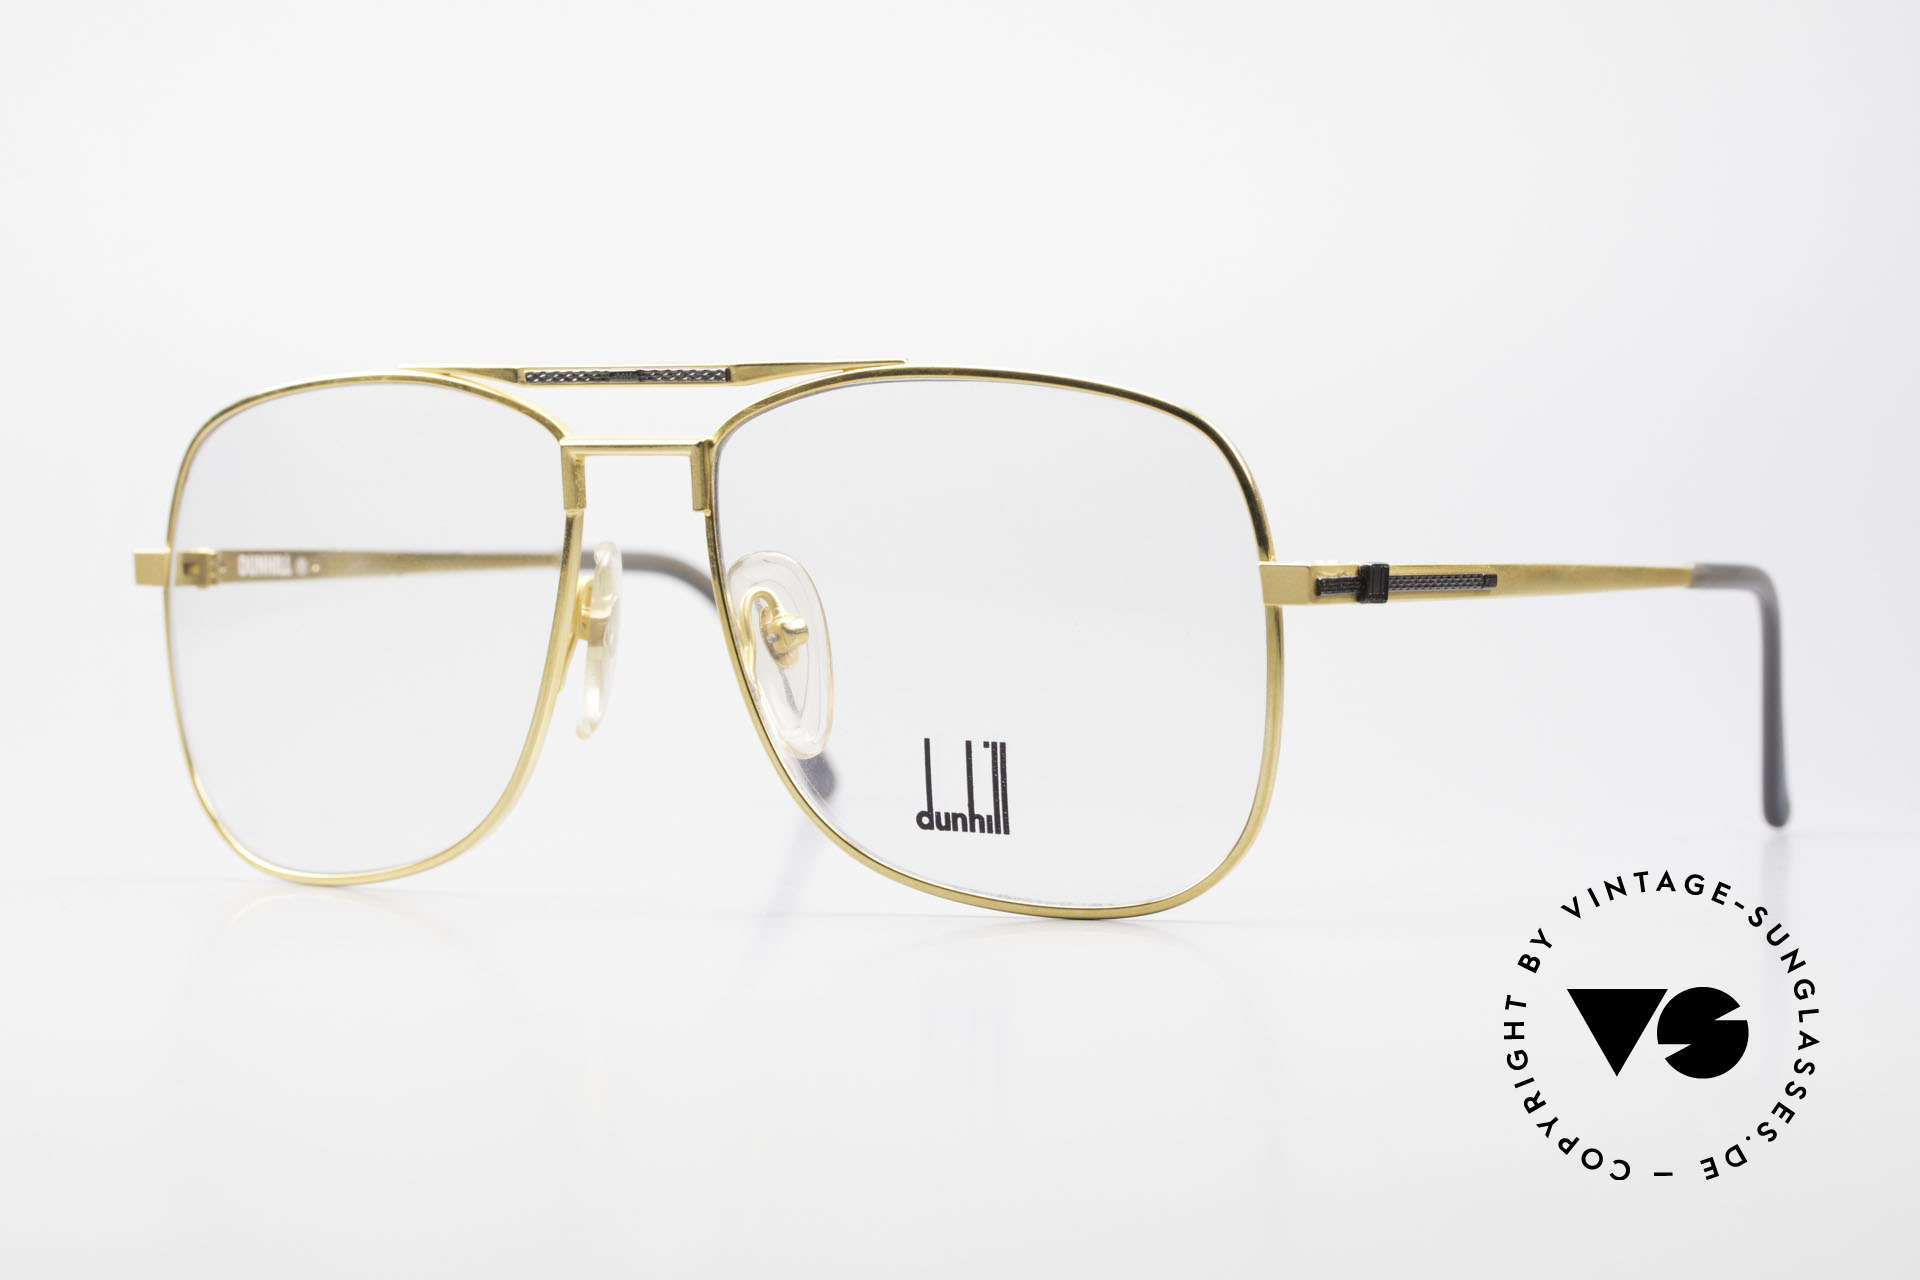 Dunhill 6038 Gold-Plated Titanium Frame, this Dunhill model is at the top of the eyewear sector, Made for Men